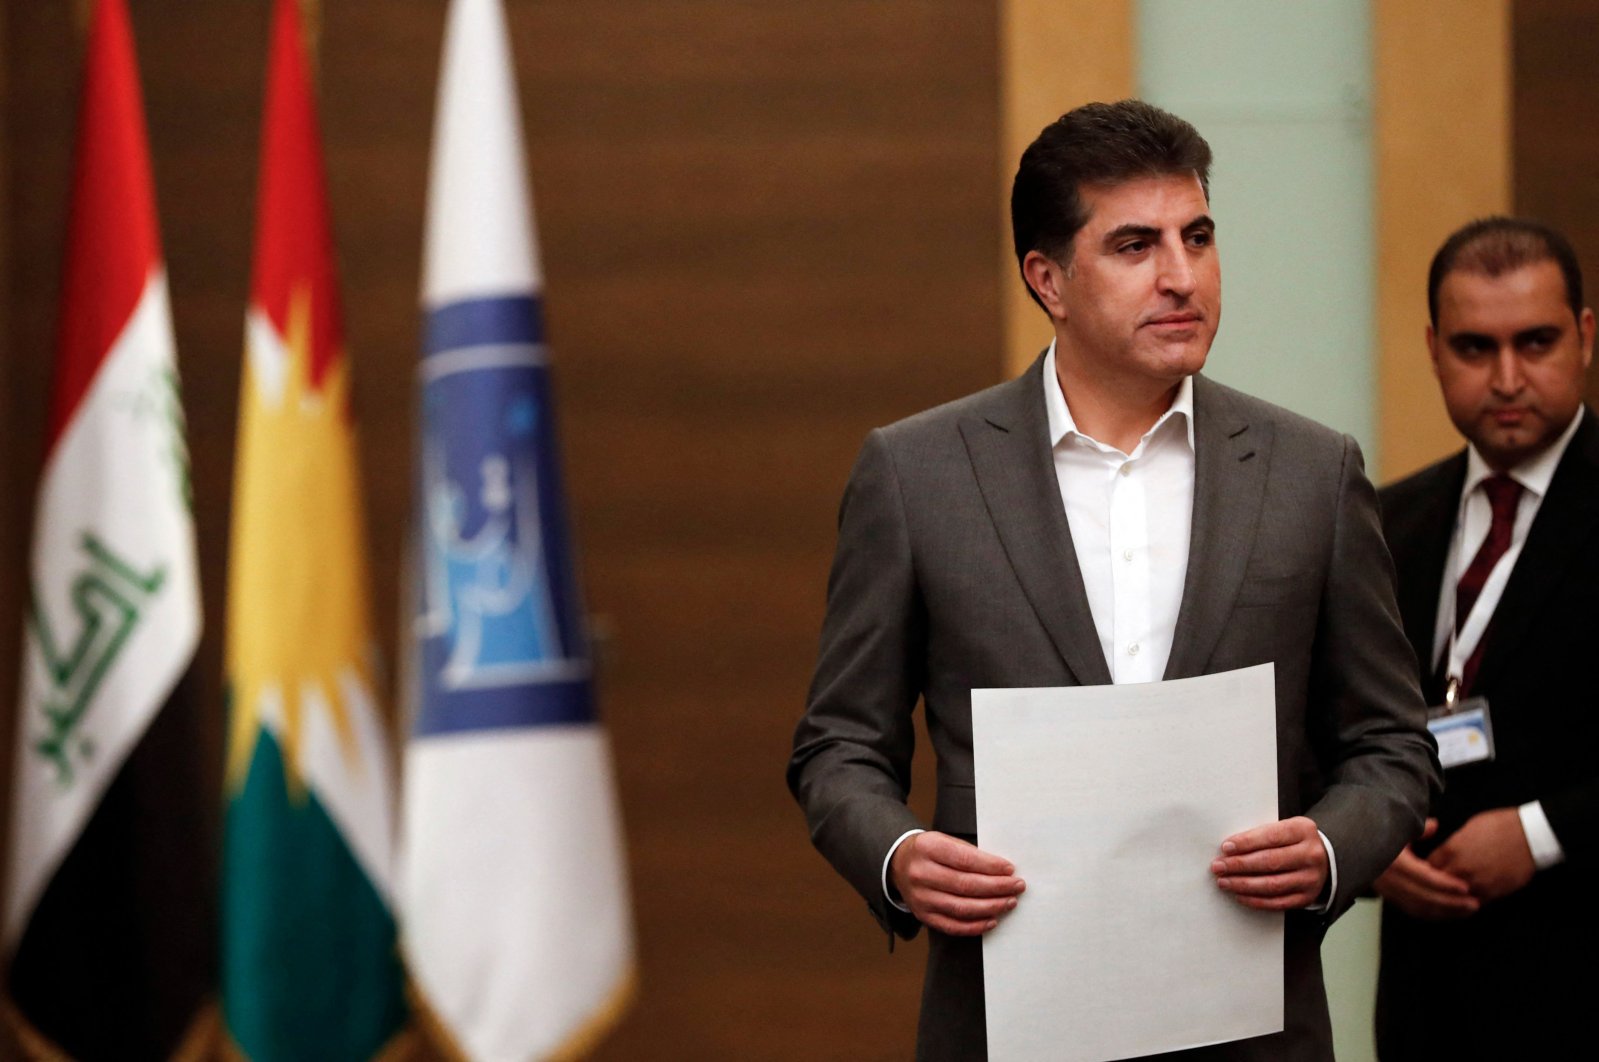 President of Iraq's Kurdistan Regional Government (KRG) Nechirvan Barzani prepares to vote in the parliamentary election at a polling station in Irbil, Iraq, Oct. 10, 2021. (AFP Photo)